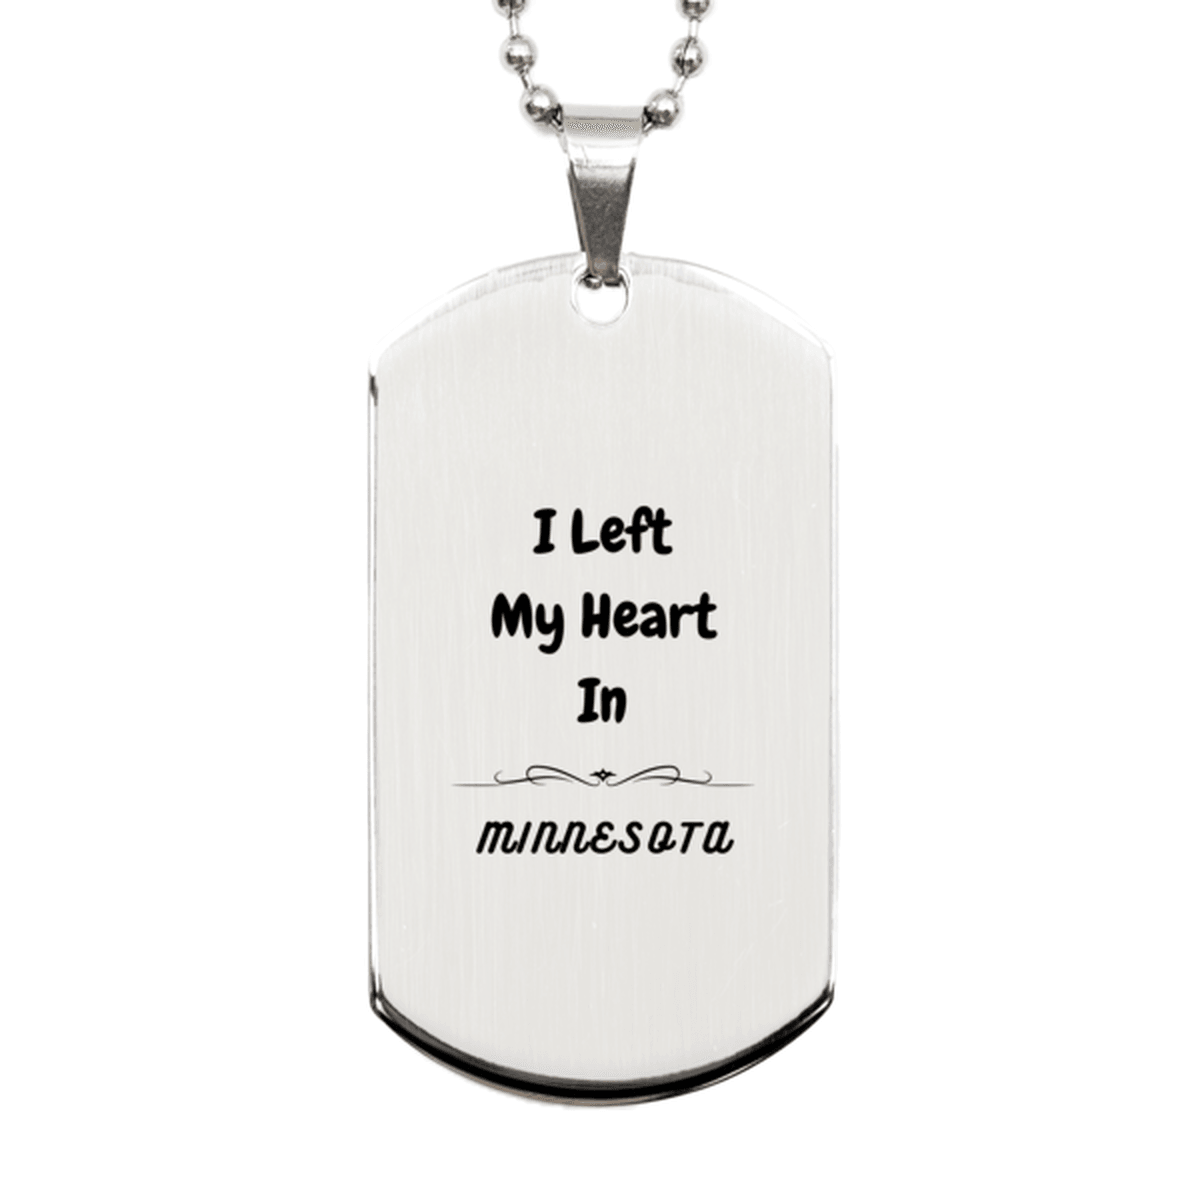 I Left My Heart In Minnesota Gifts, Meaningful Minnesota State for Friends, Men, Women. Silver Dog Tag for Minnesota People - Mallard Moon Gift Shop